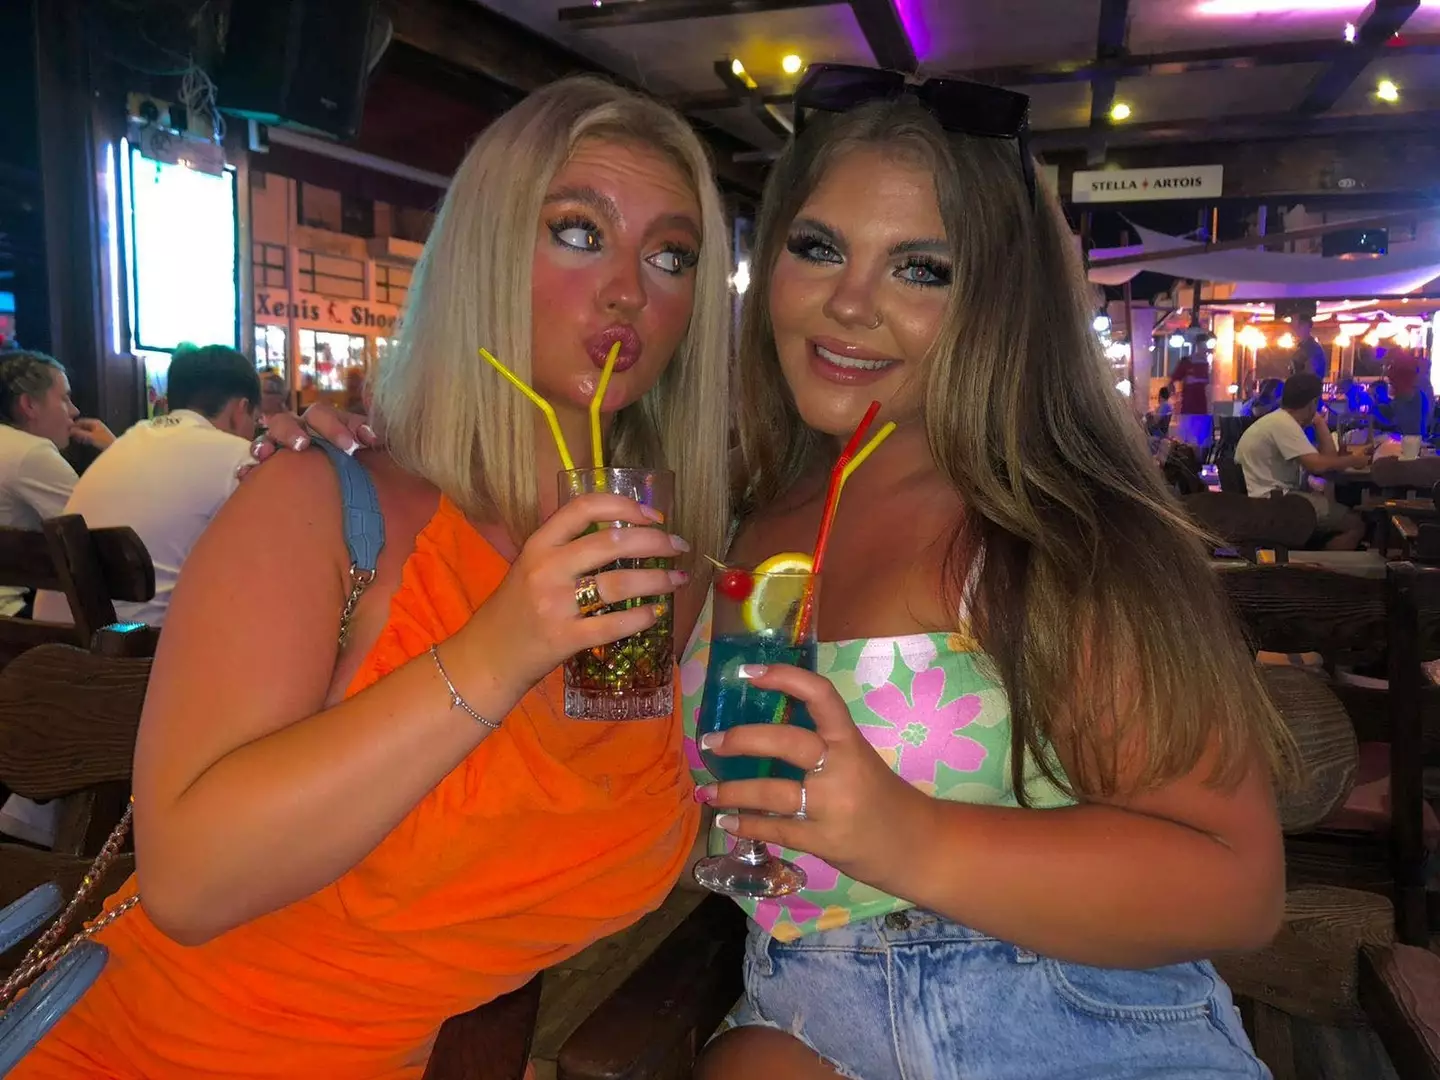 Ruby was on holiday in Ayia Napa with her sister, Macey, to celebrate her uncle and aunt getting married when the incident unfolded.